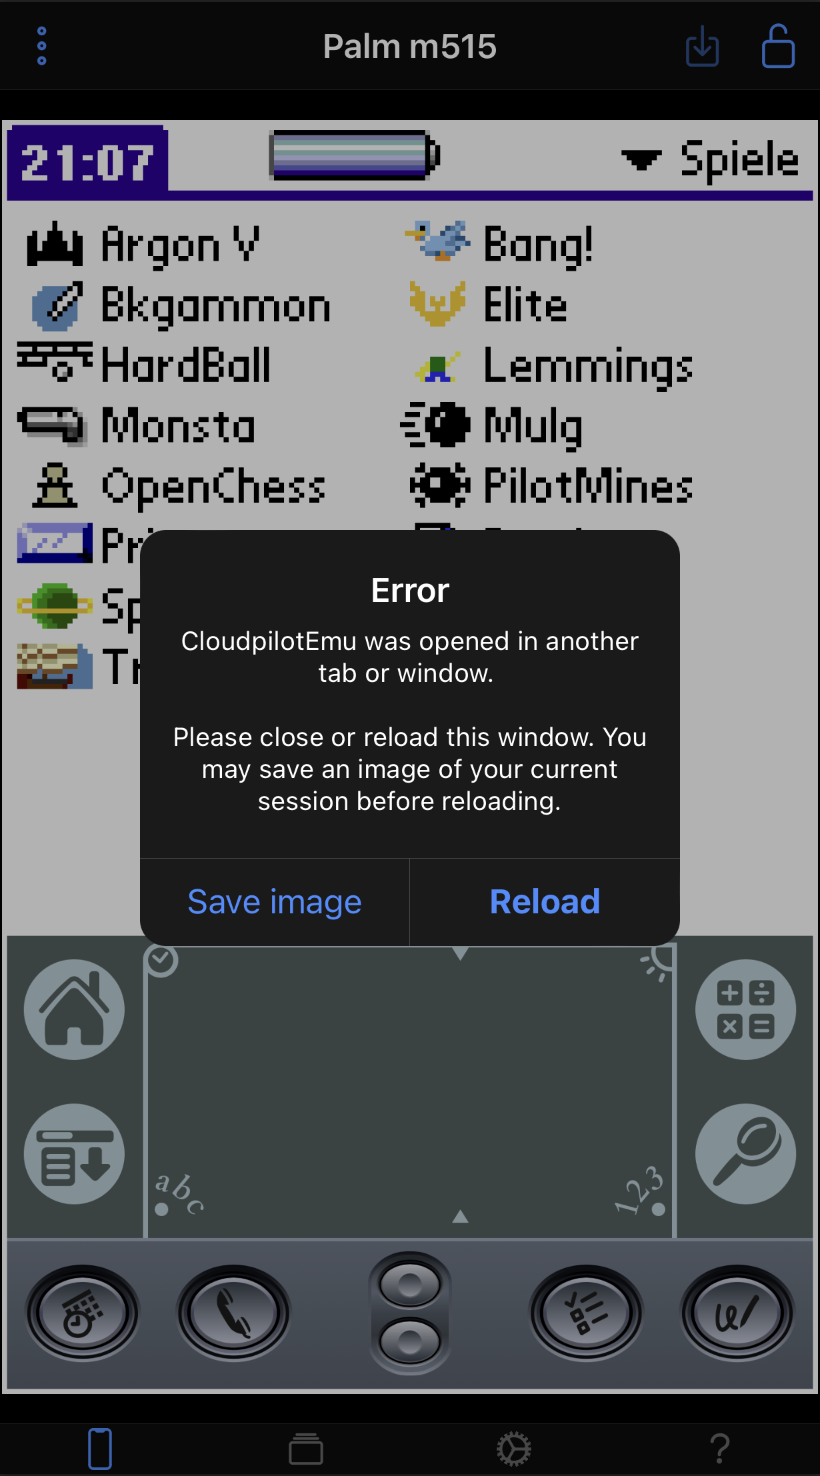 CloudpilotEmu crashed after opening it in another tab